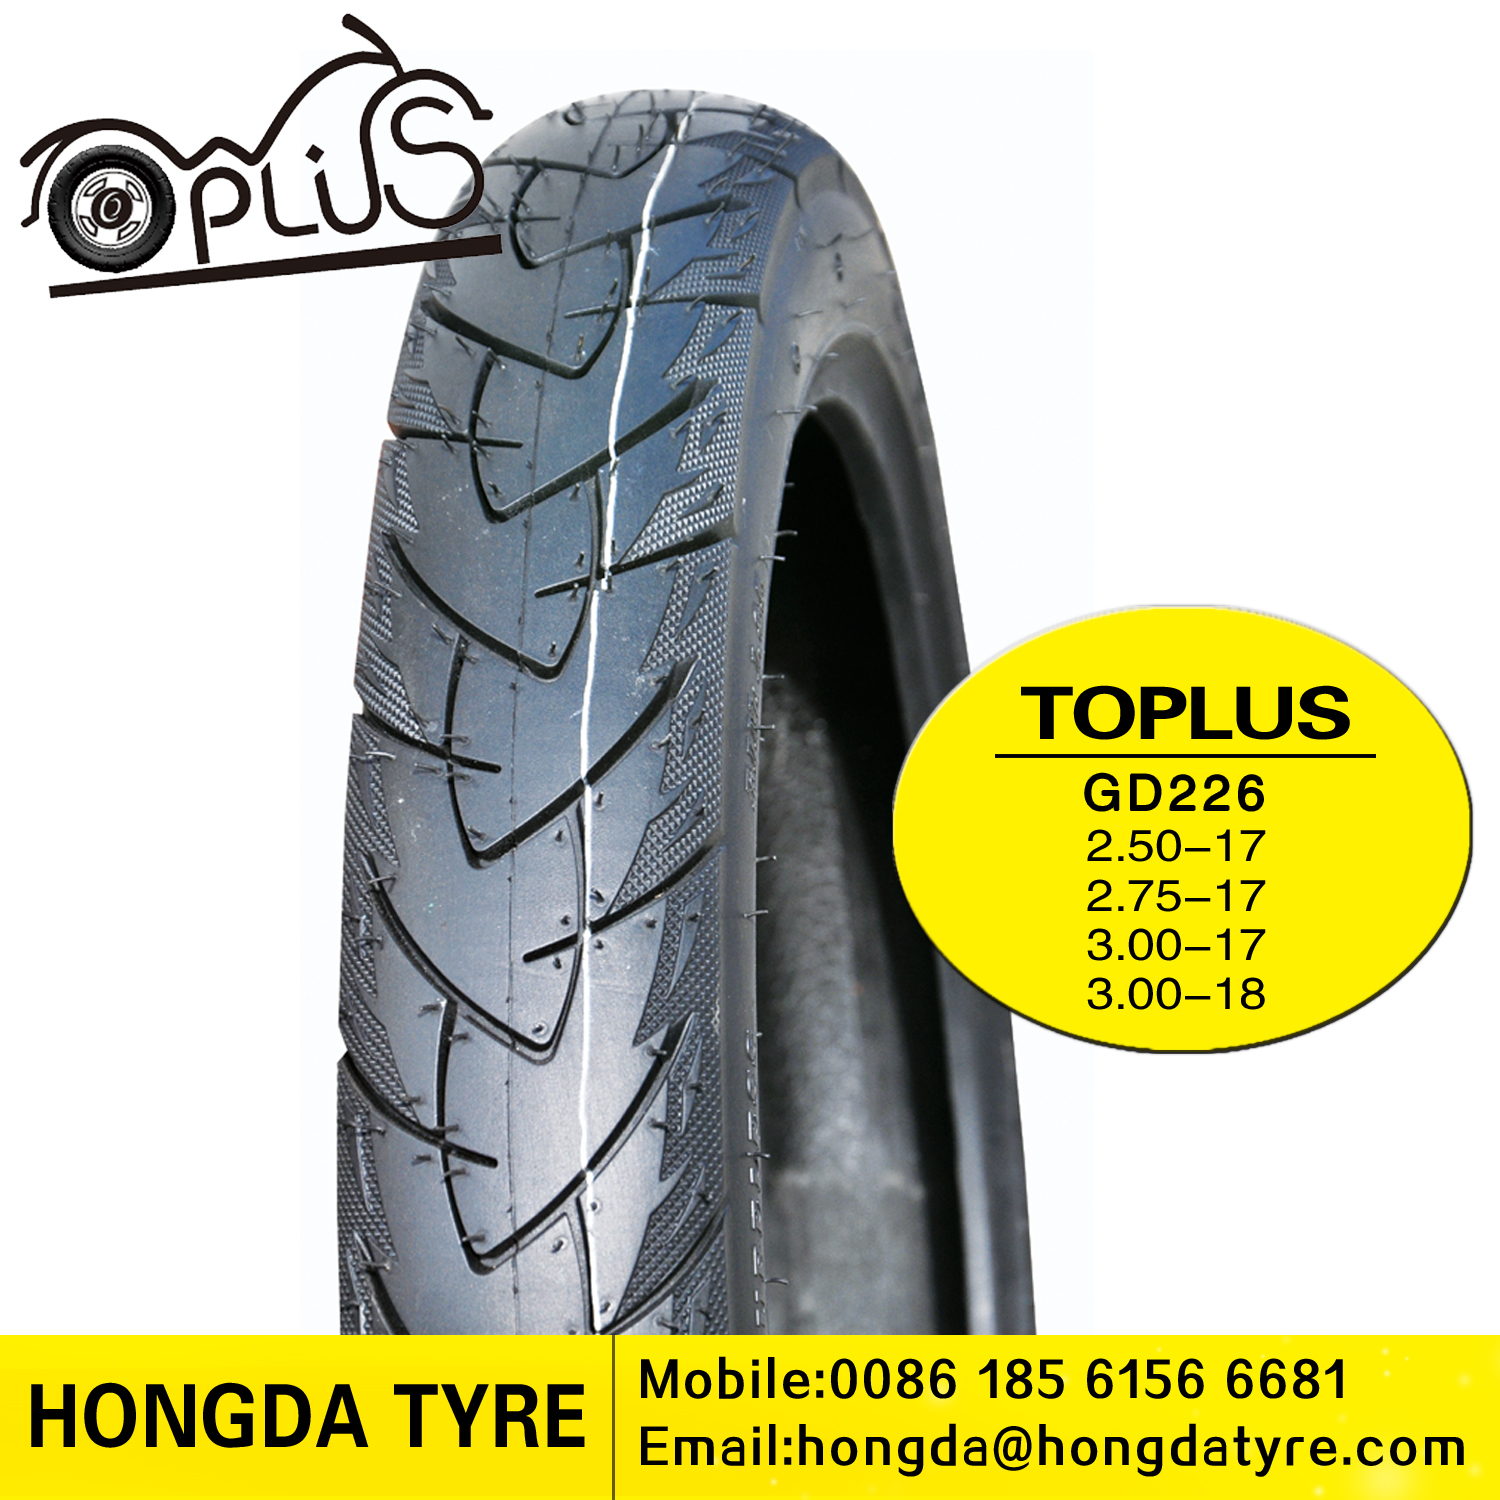 Motorcycle tyre GD226